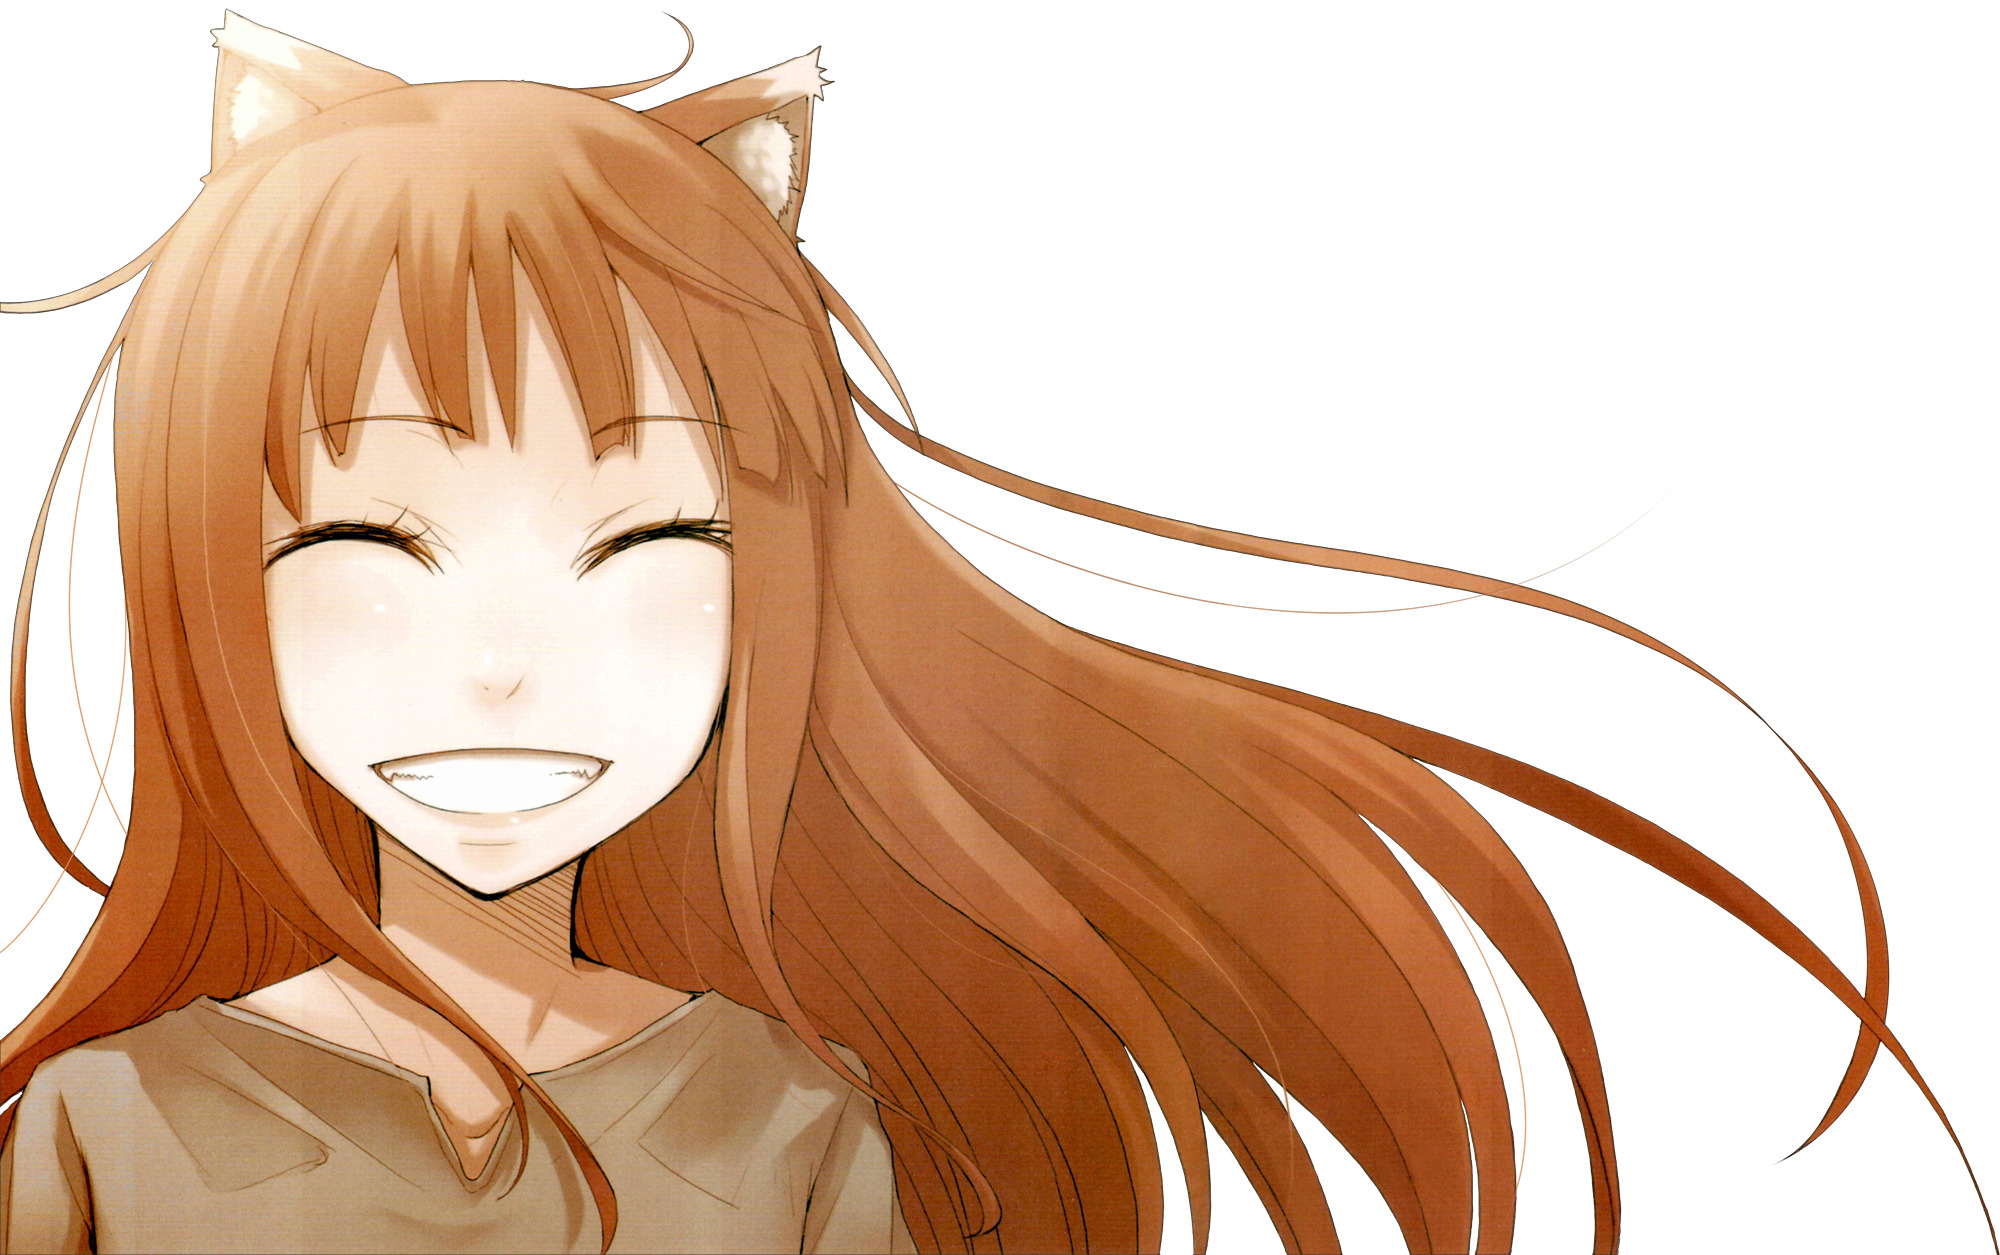 Spice And Wolf, Holo, Anime Girls Wallpapers HD / Desktop ...